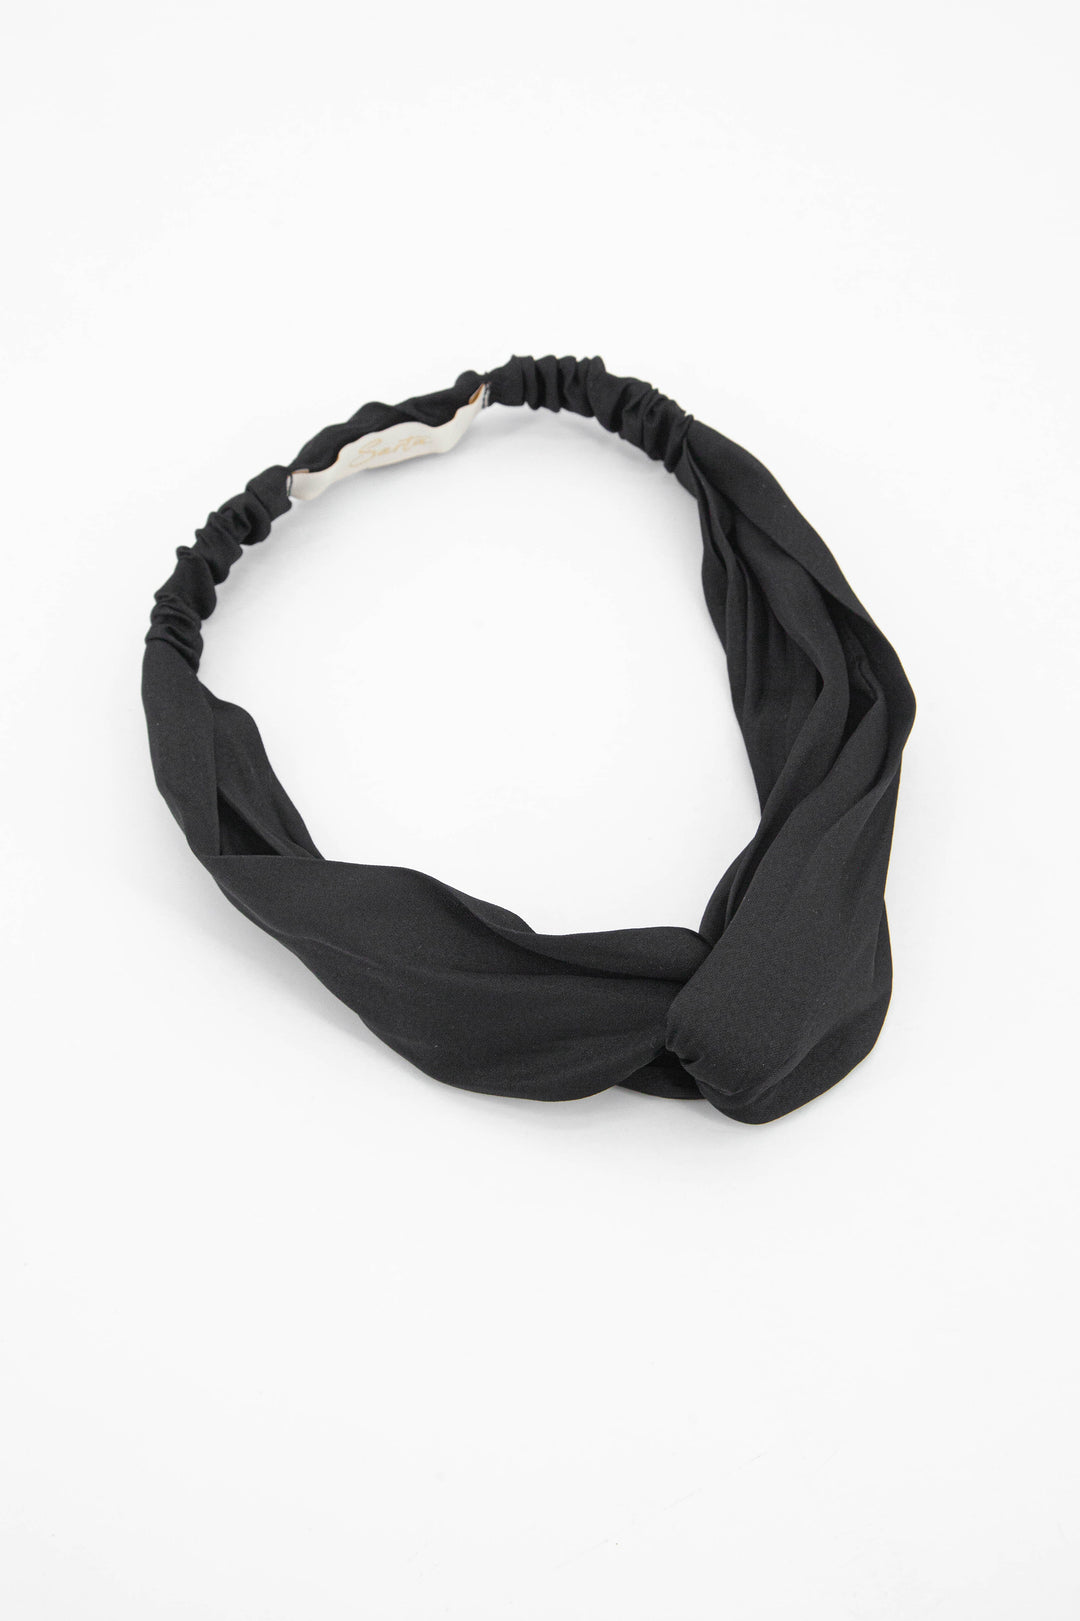 plain black headband with an twist at the front